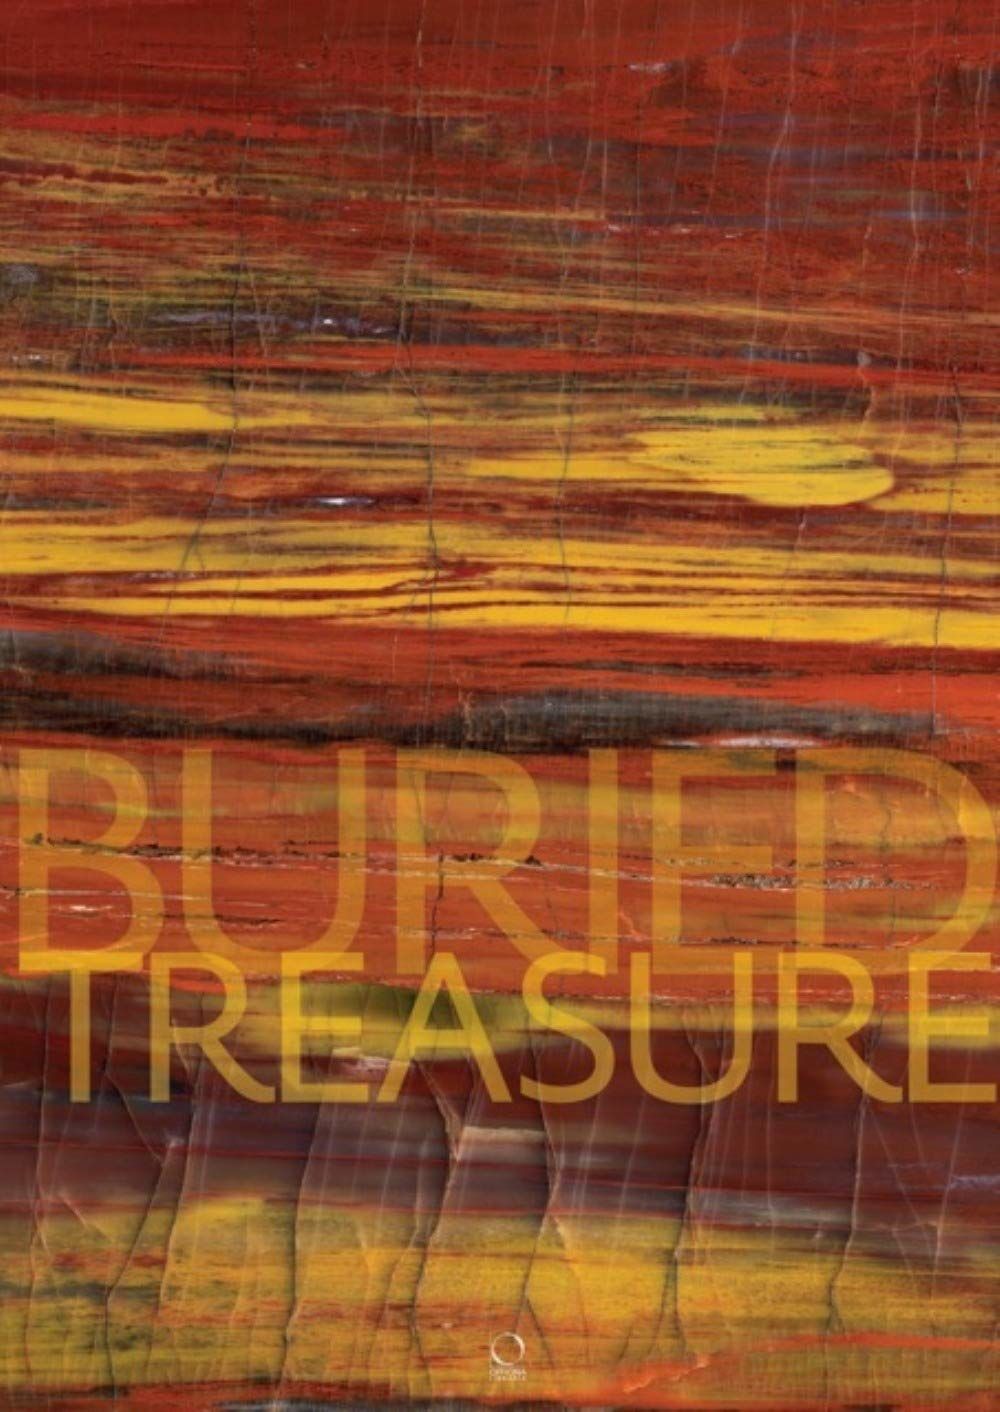 Buried Treasure:The Gillespie Collection of Petrified Wood